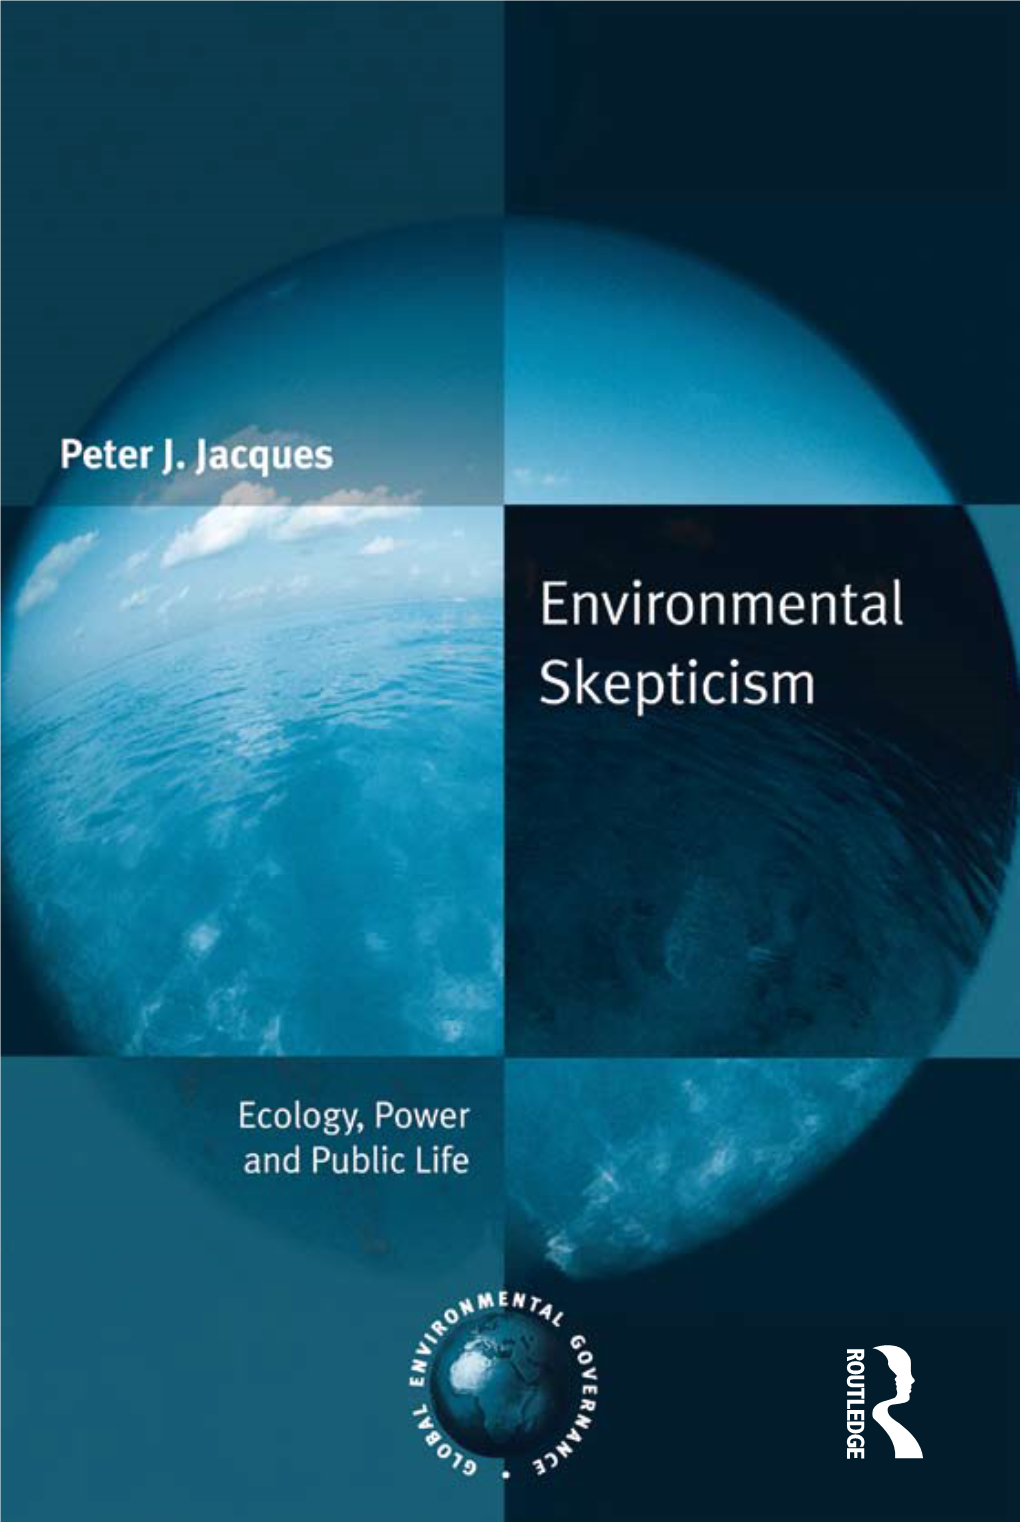 Environmental Skepticism: Ecology, Power and Public Life